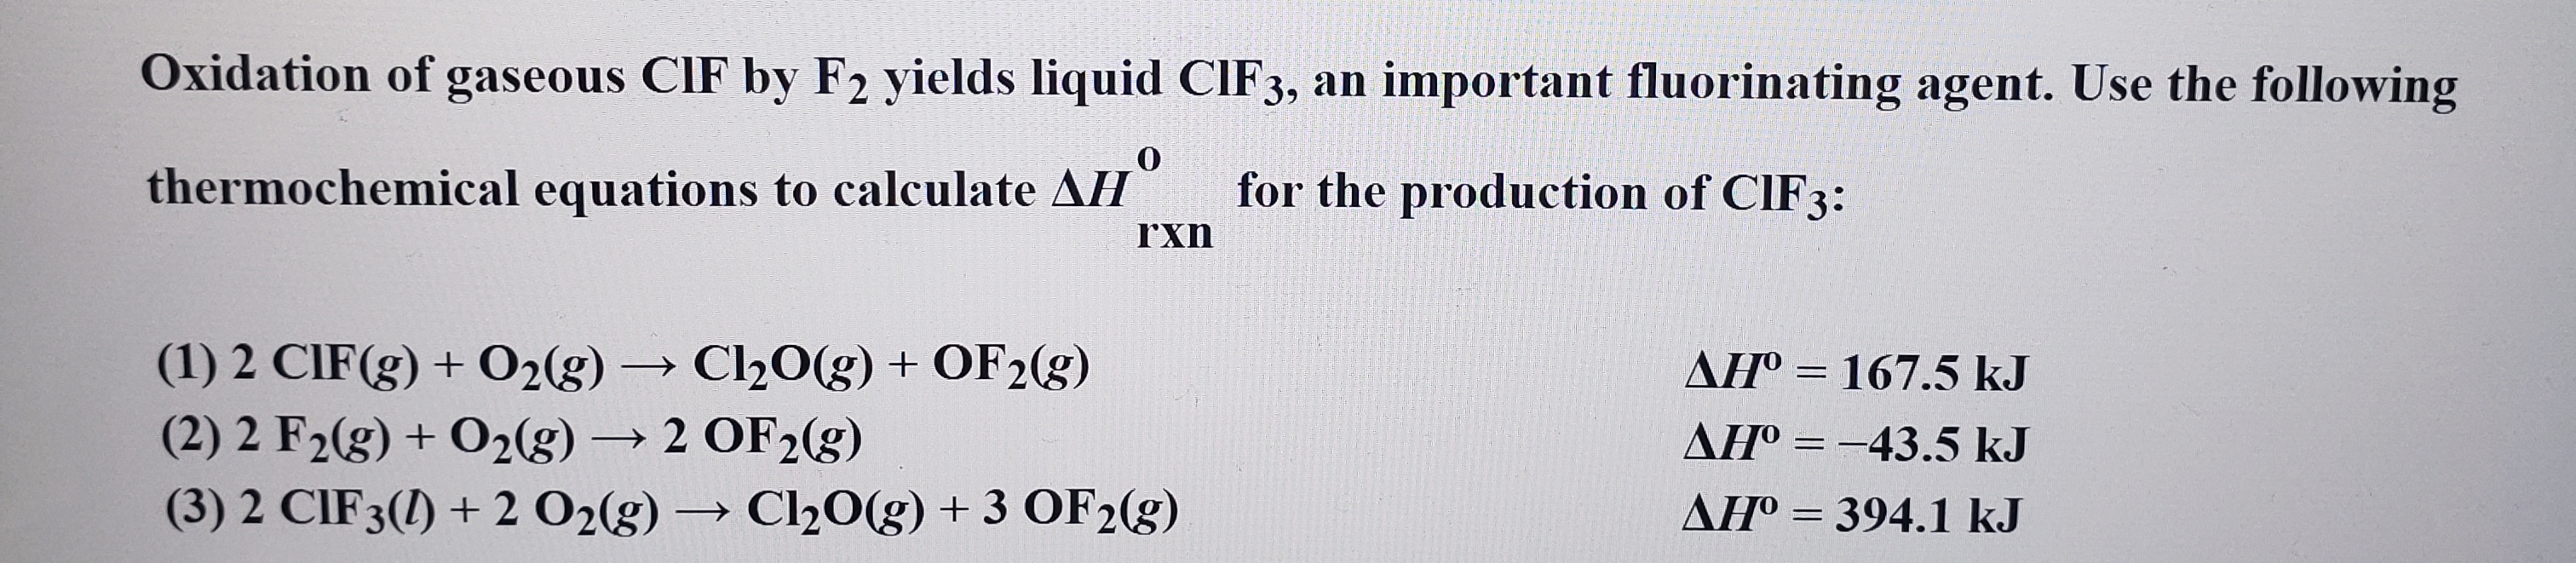 Oxidation of
CIF by F2 yields liquid CIF3, an important fluorinating agent. Use the following
gaseous
thermochemical equations to calculate AH
for the production of CIF3:
rxn
(1) 2 CIF(g)+O2(g)Cl20(g) + OF2(g)
(2) 2 F2(g) + O2(g)2 OF2(g)
(3) 2 CIF 3() 2 O2(g) Cl20(g) + 3 OF2(g)
AH° 167.5 kJ
AHo 43.5 kJ
AHO 394.1 kJ
